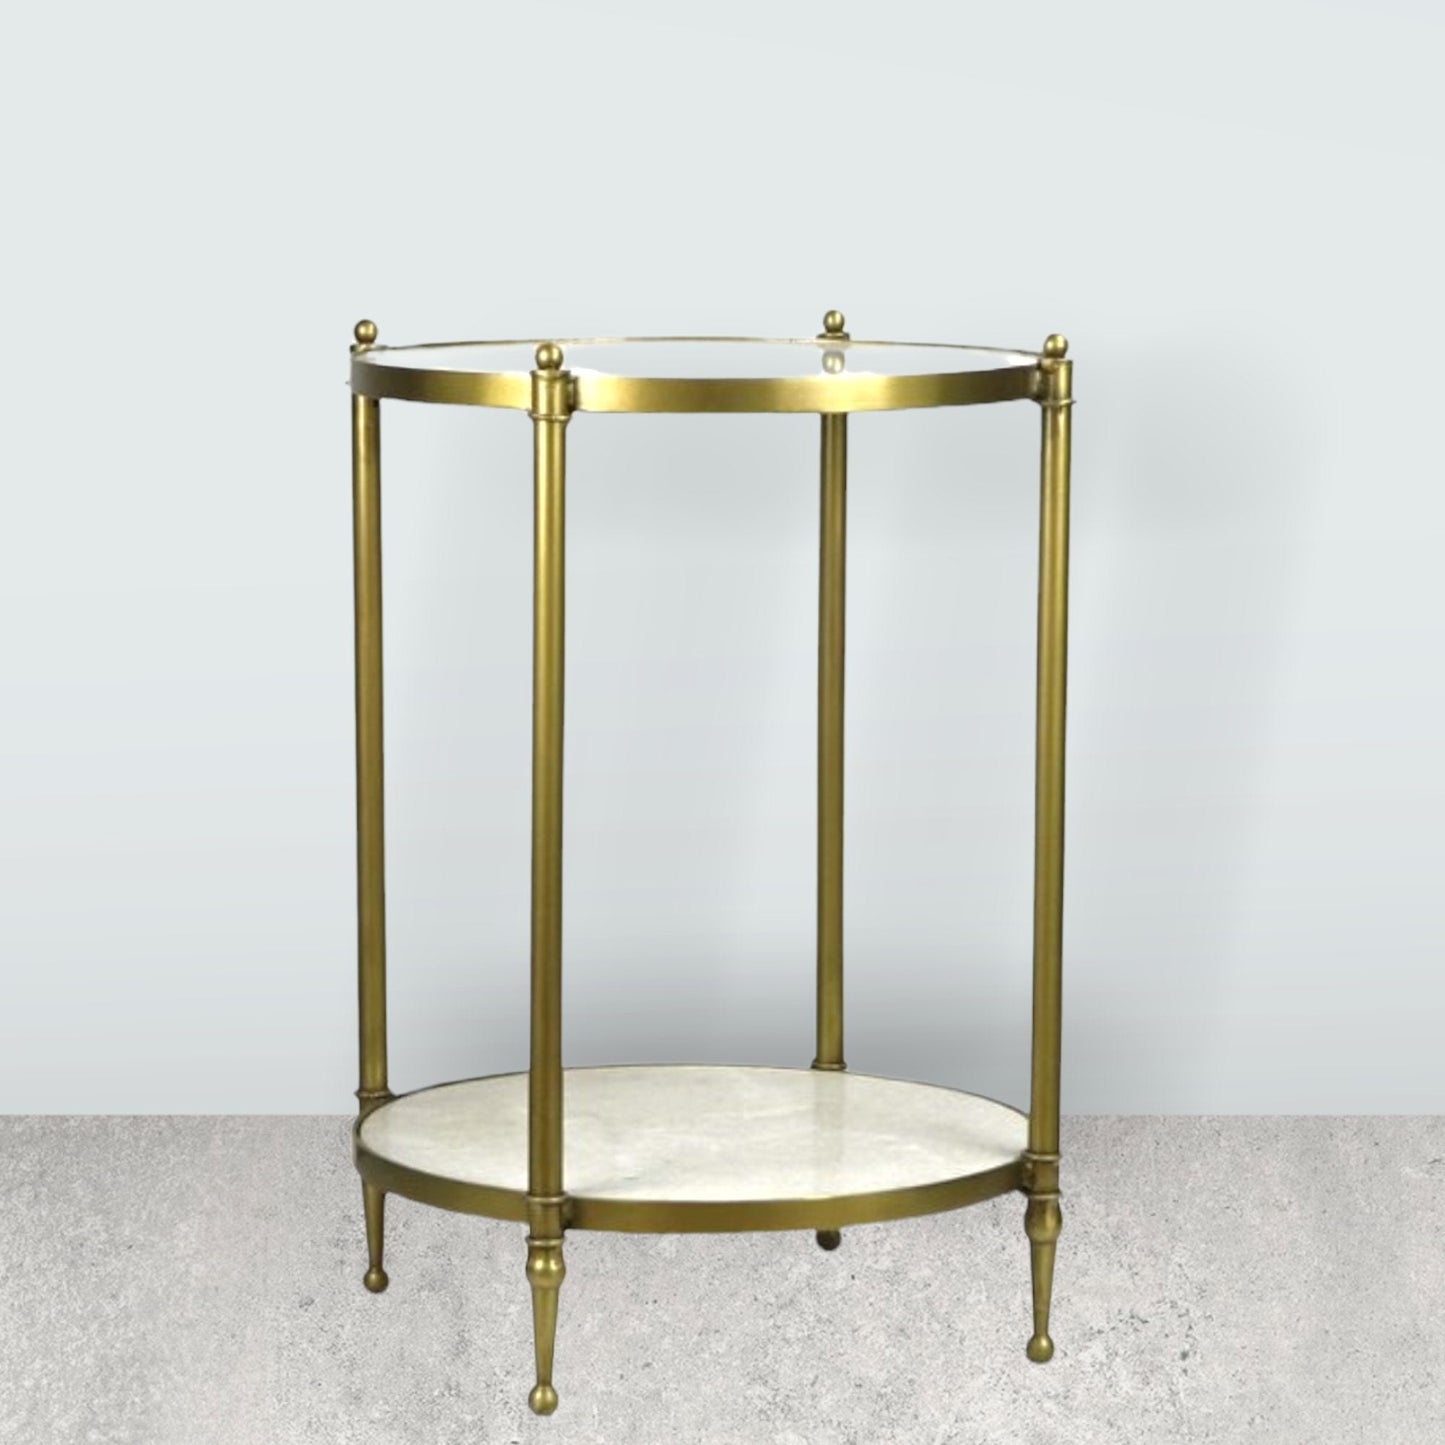 Mason Side Table - Curated Home Decor